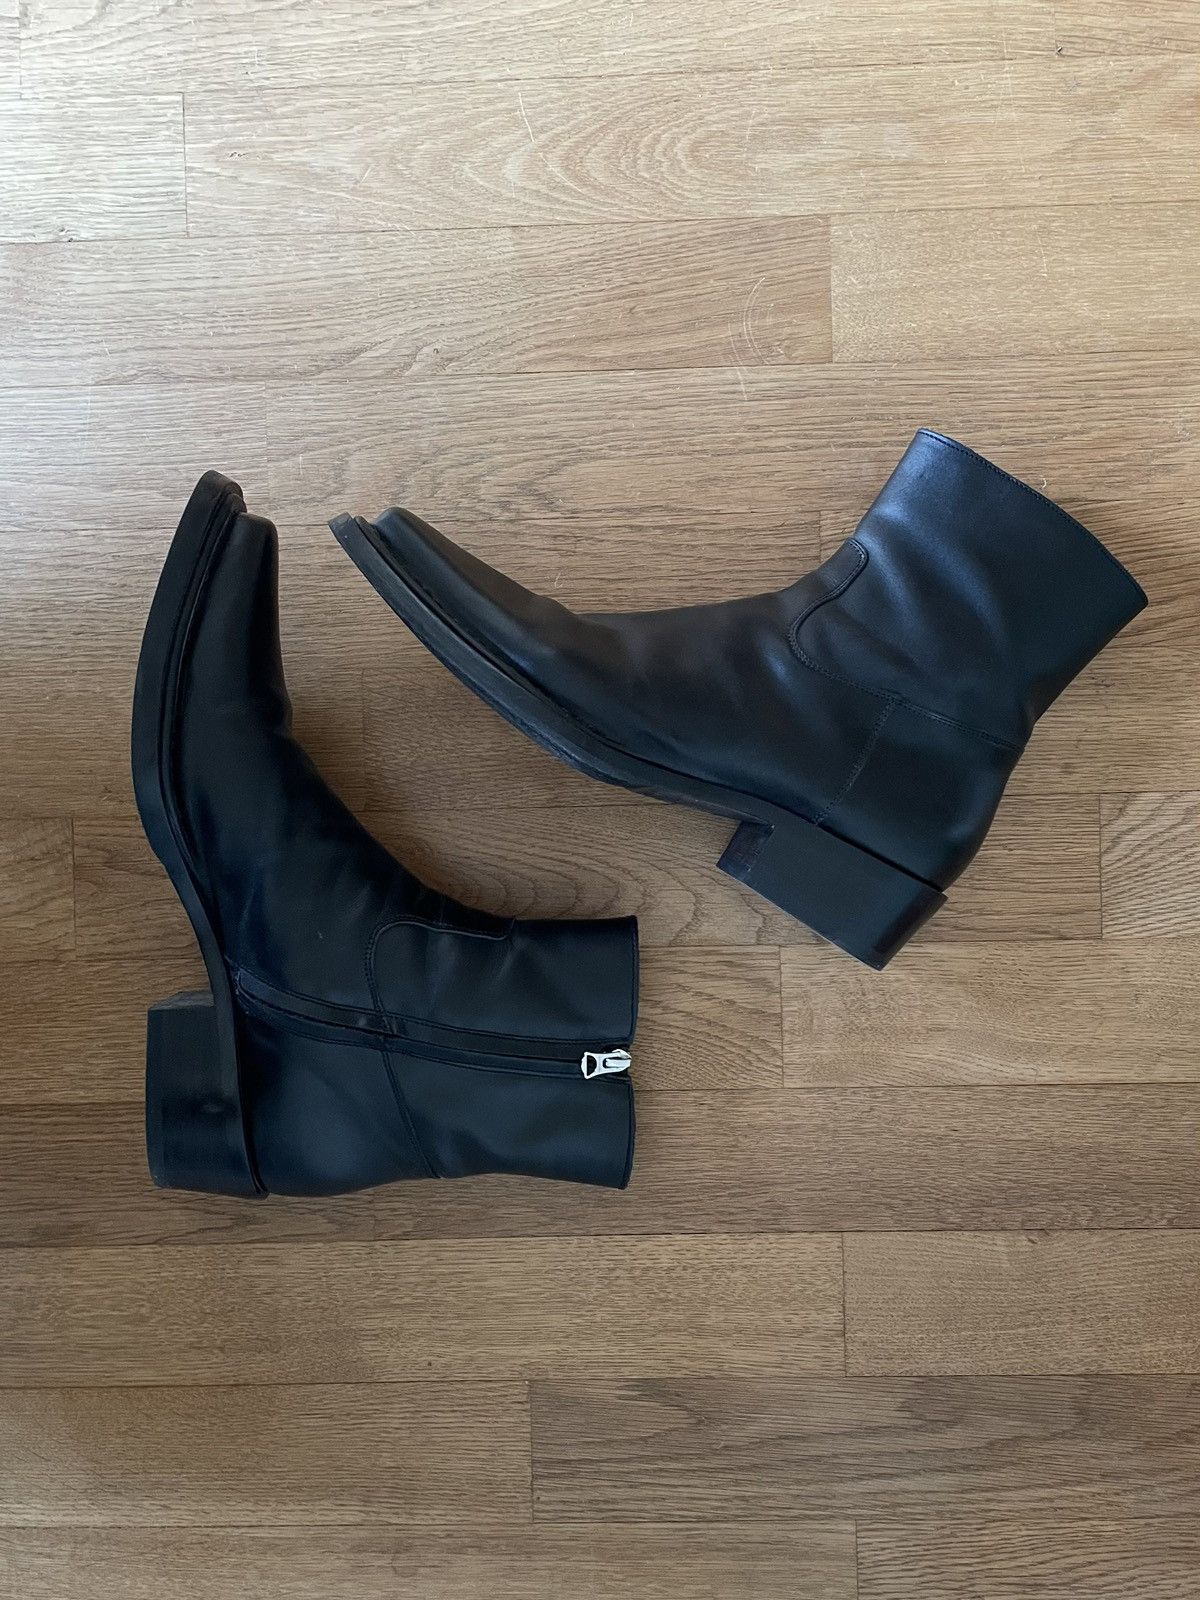 Acne Studios Black Glossed Leather Boots